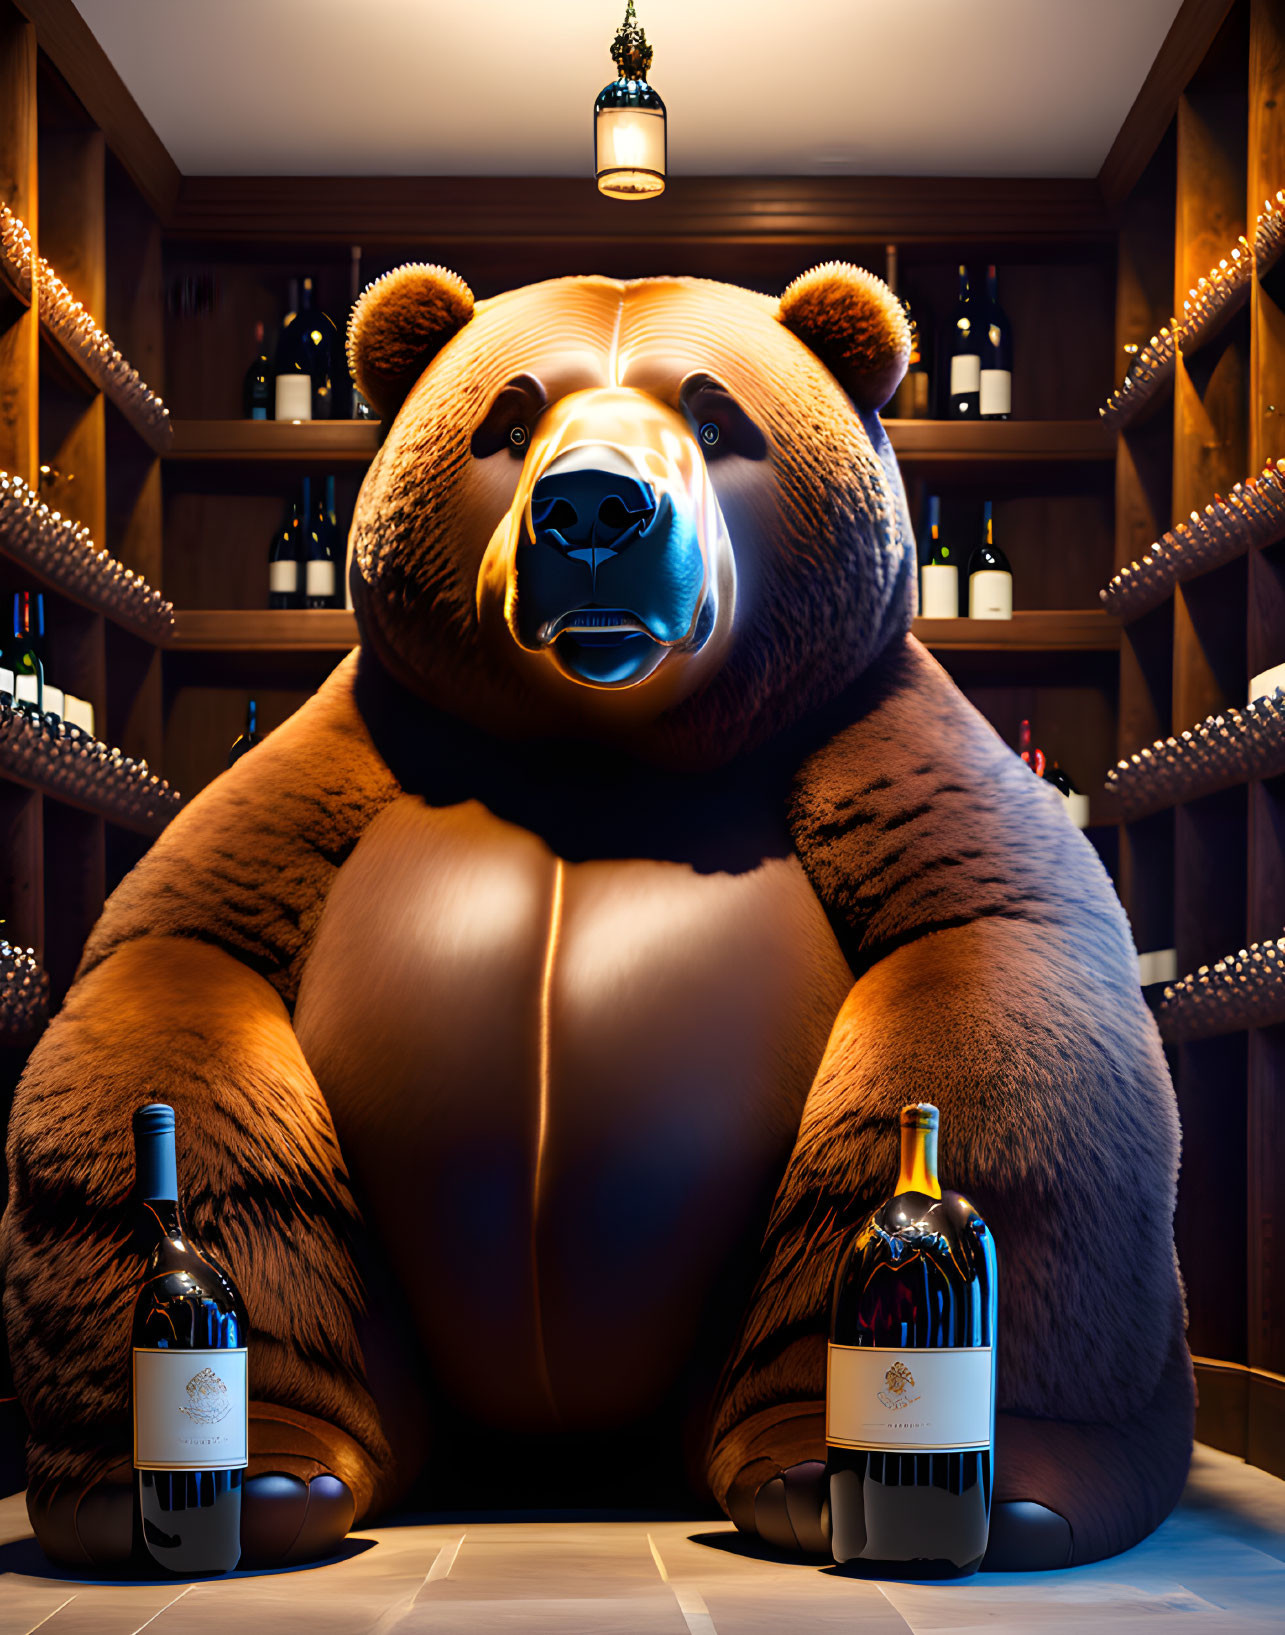 Plush Bear in Wine Cellar Surrounded by Bottles